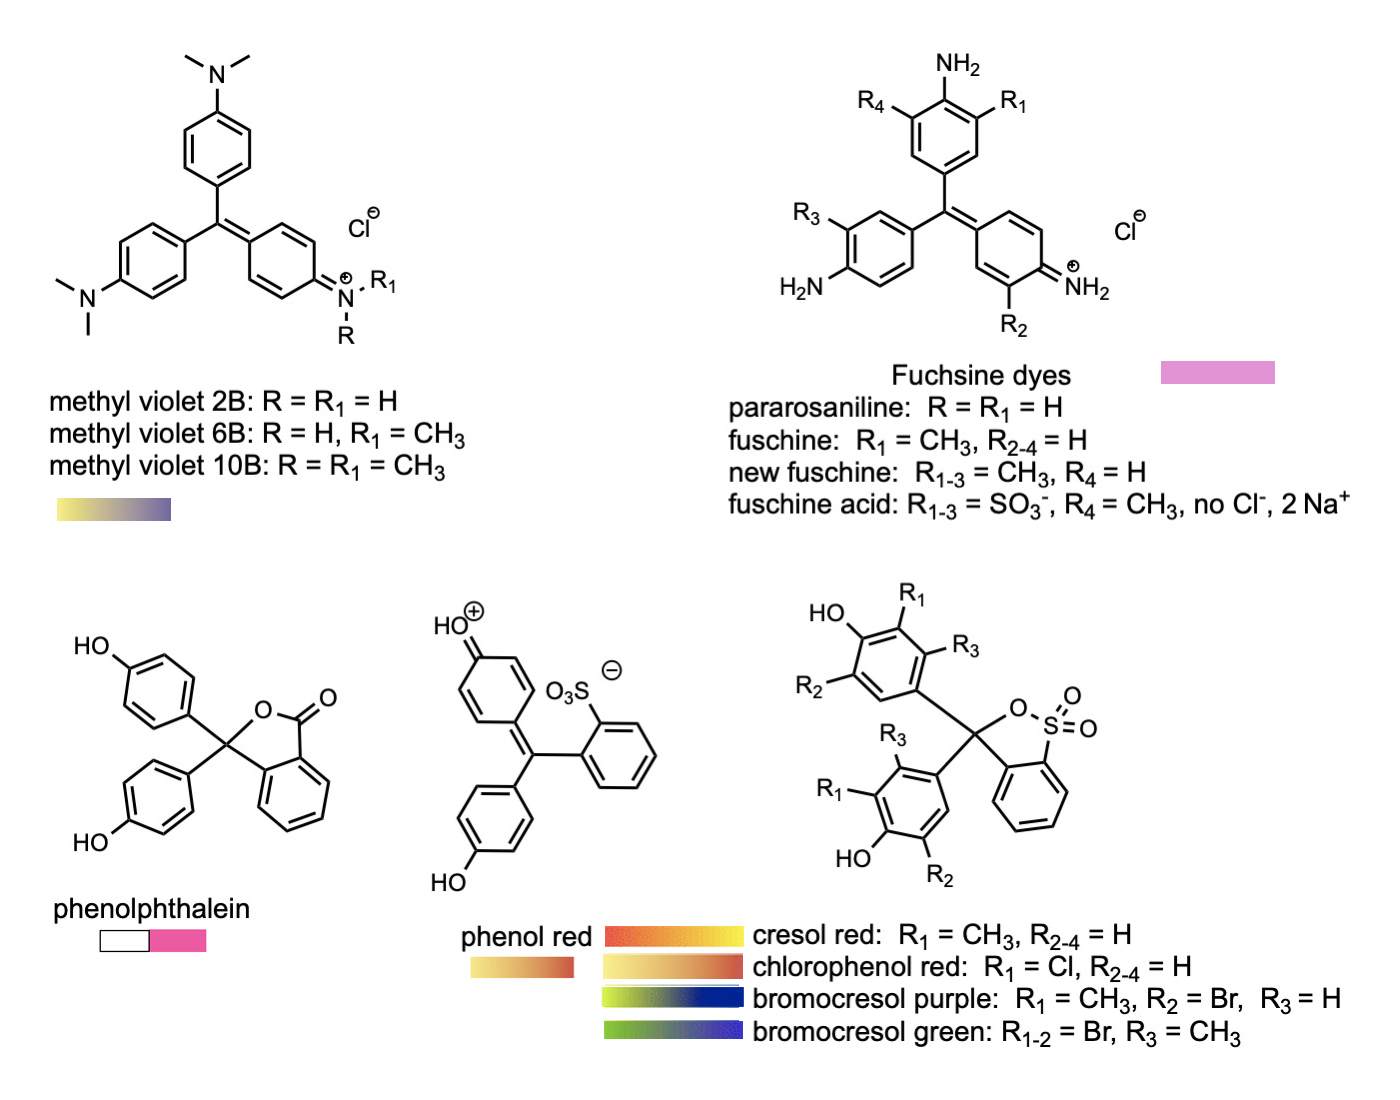 structures of several triaryl dyes and indicators